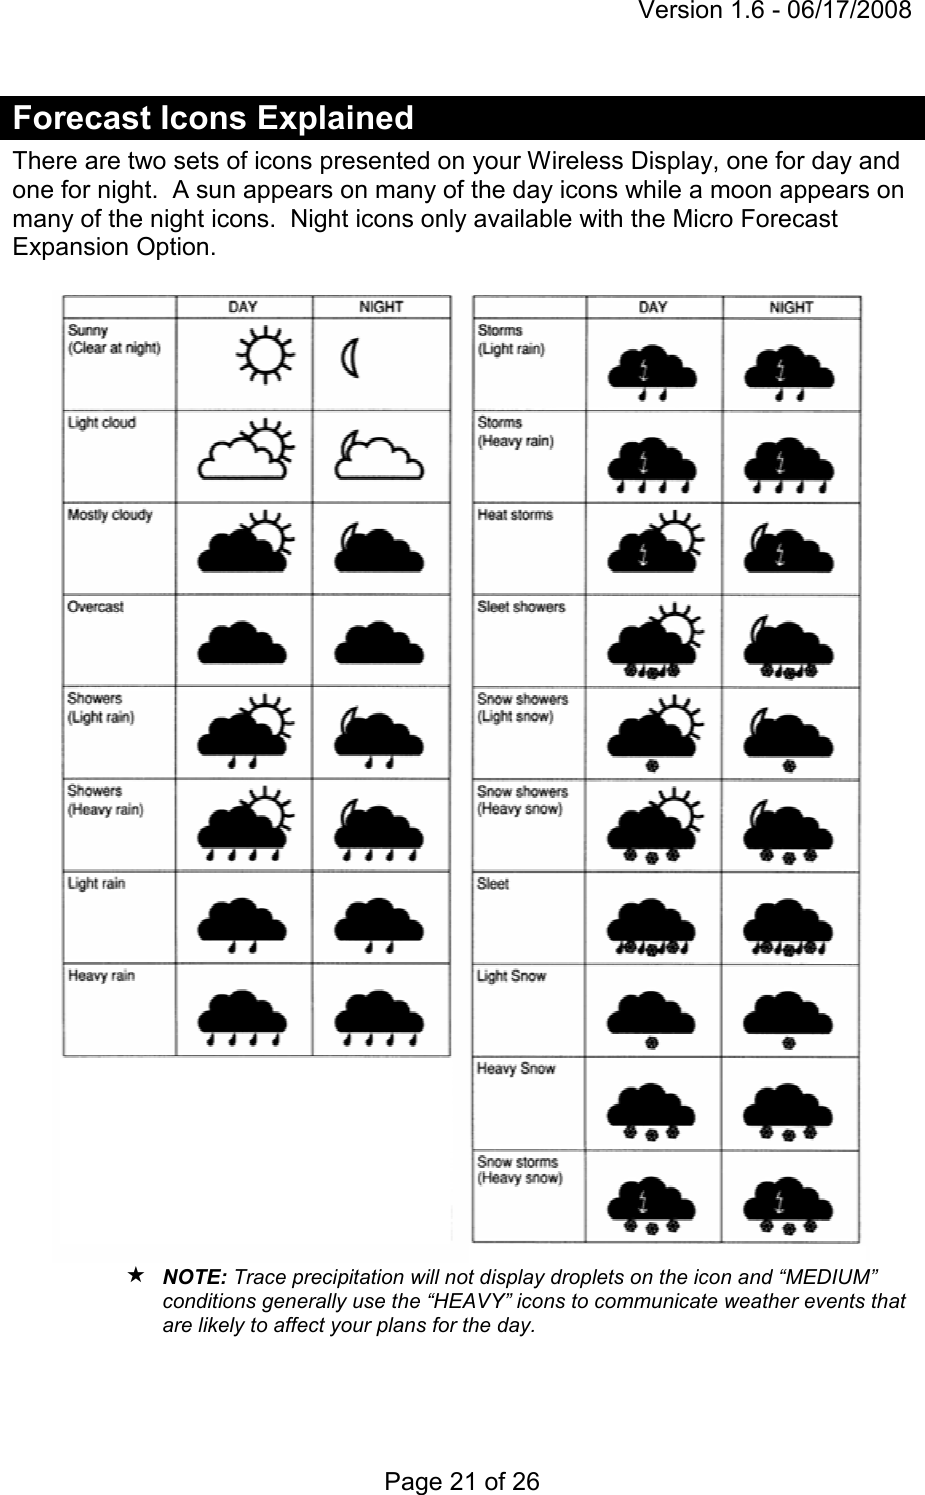 Version 1.6 - 06/17/2008 Page 21 of 26 Forecast Icons Explained There are two sets of icons presented on your Wireless Display, one for day and one for night.  A sun appears on many of the day icons while a moon appears on many of the night icons.  Night icons only available with the Micro Forecast Expansion Option.    NOTE: Trace precipitation will not display droplets on the icon and “MEDIUM” conditions generally use the “HEAVY” icons to communicate weather events that are likely to affect your plans for the day.